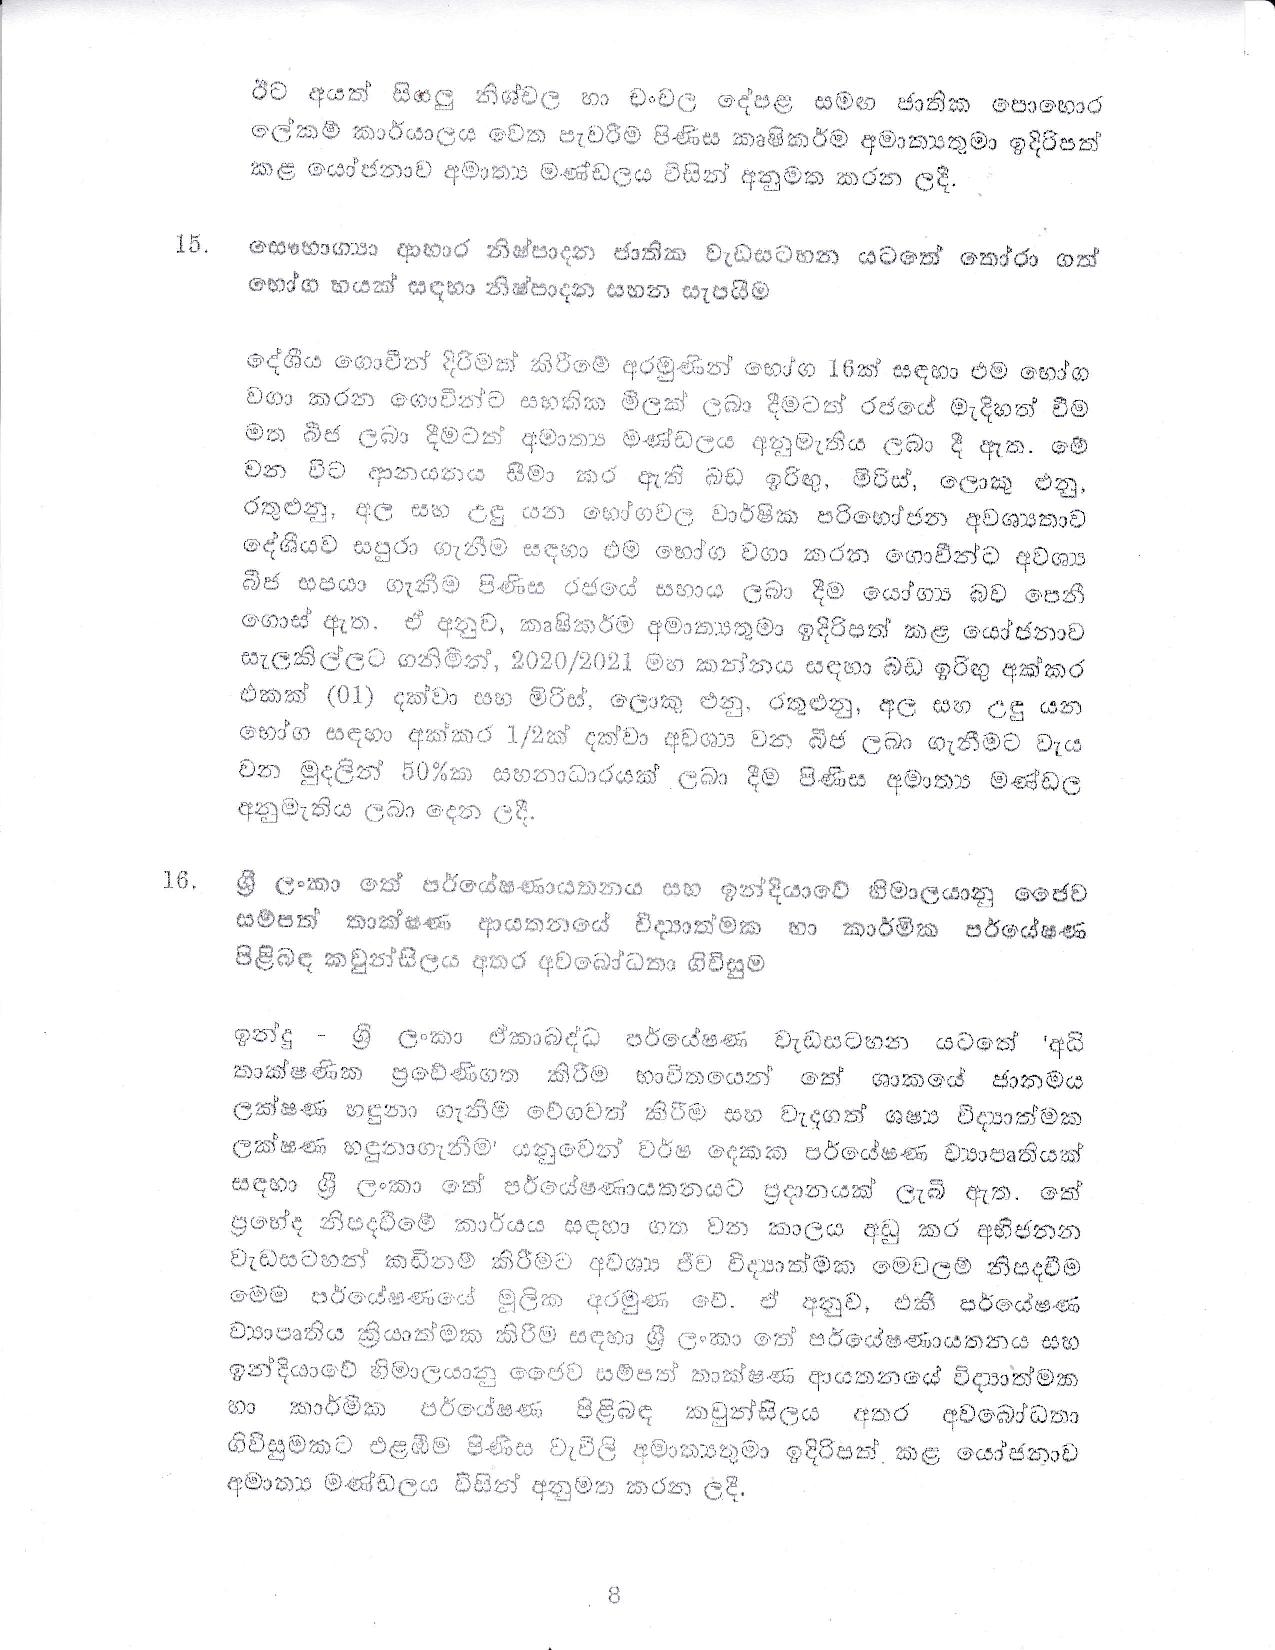 Cabinet Decision on 16.11.2020 page 008